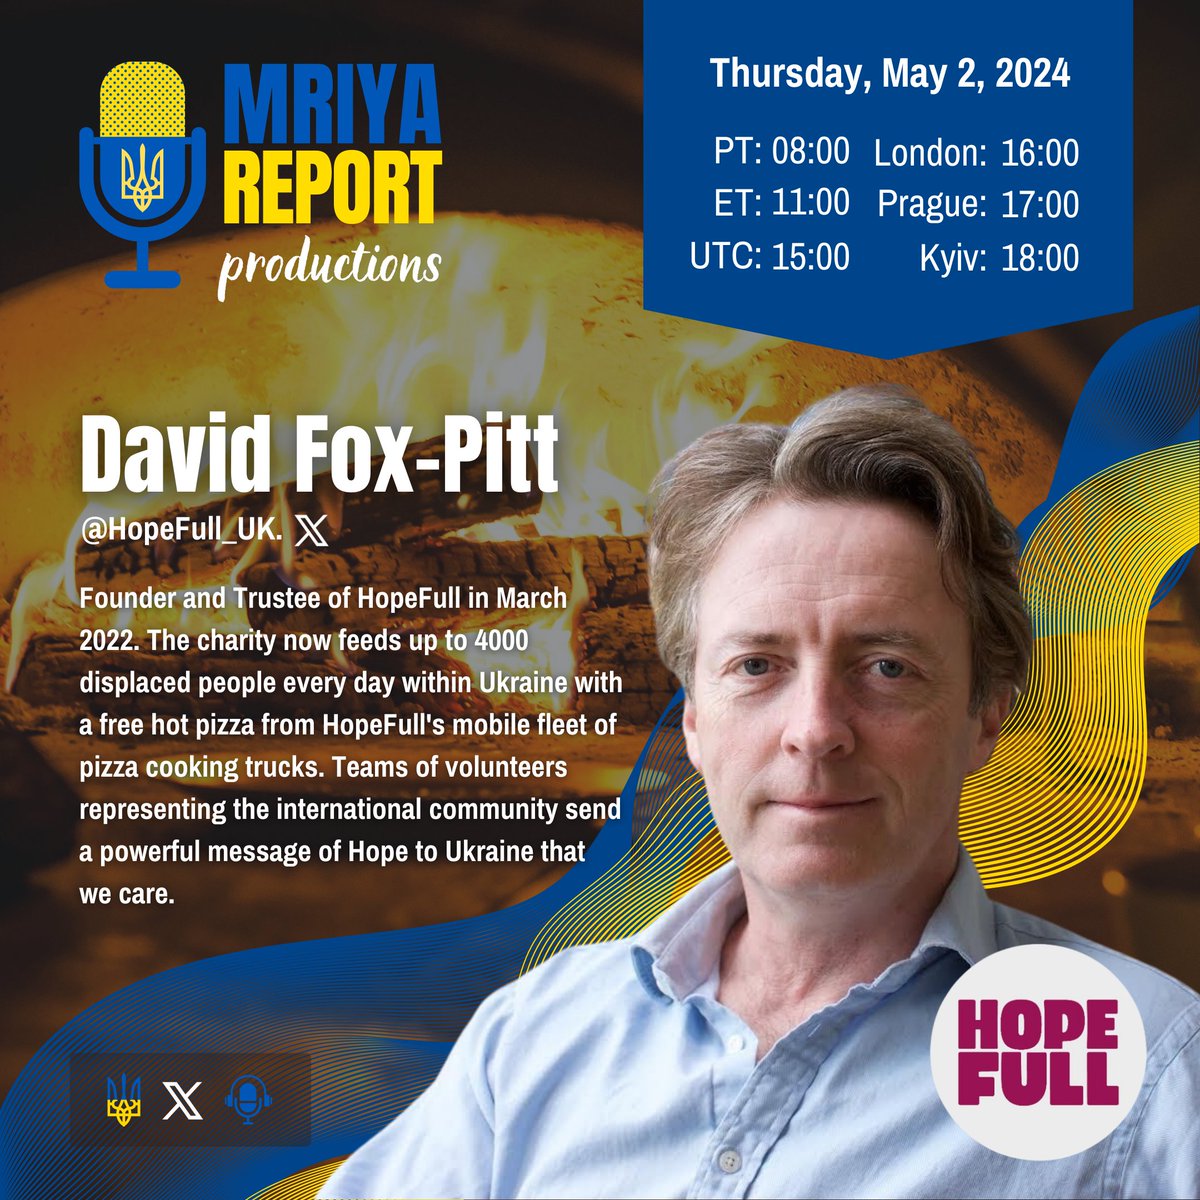 🇺🇦 Please join us Thursday, May 2 🇺🇦 for a conversation with our very special guest David Fox-Pitt! @HopeFull_UK Founder and Trustee of #HopeFull in March 2022. The charity now feeds up to 4000 displaced people every day within Ukraine with a free hot pizza from HopeFull's…